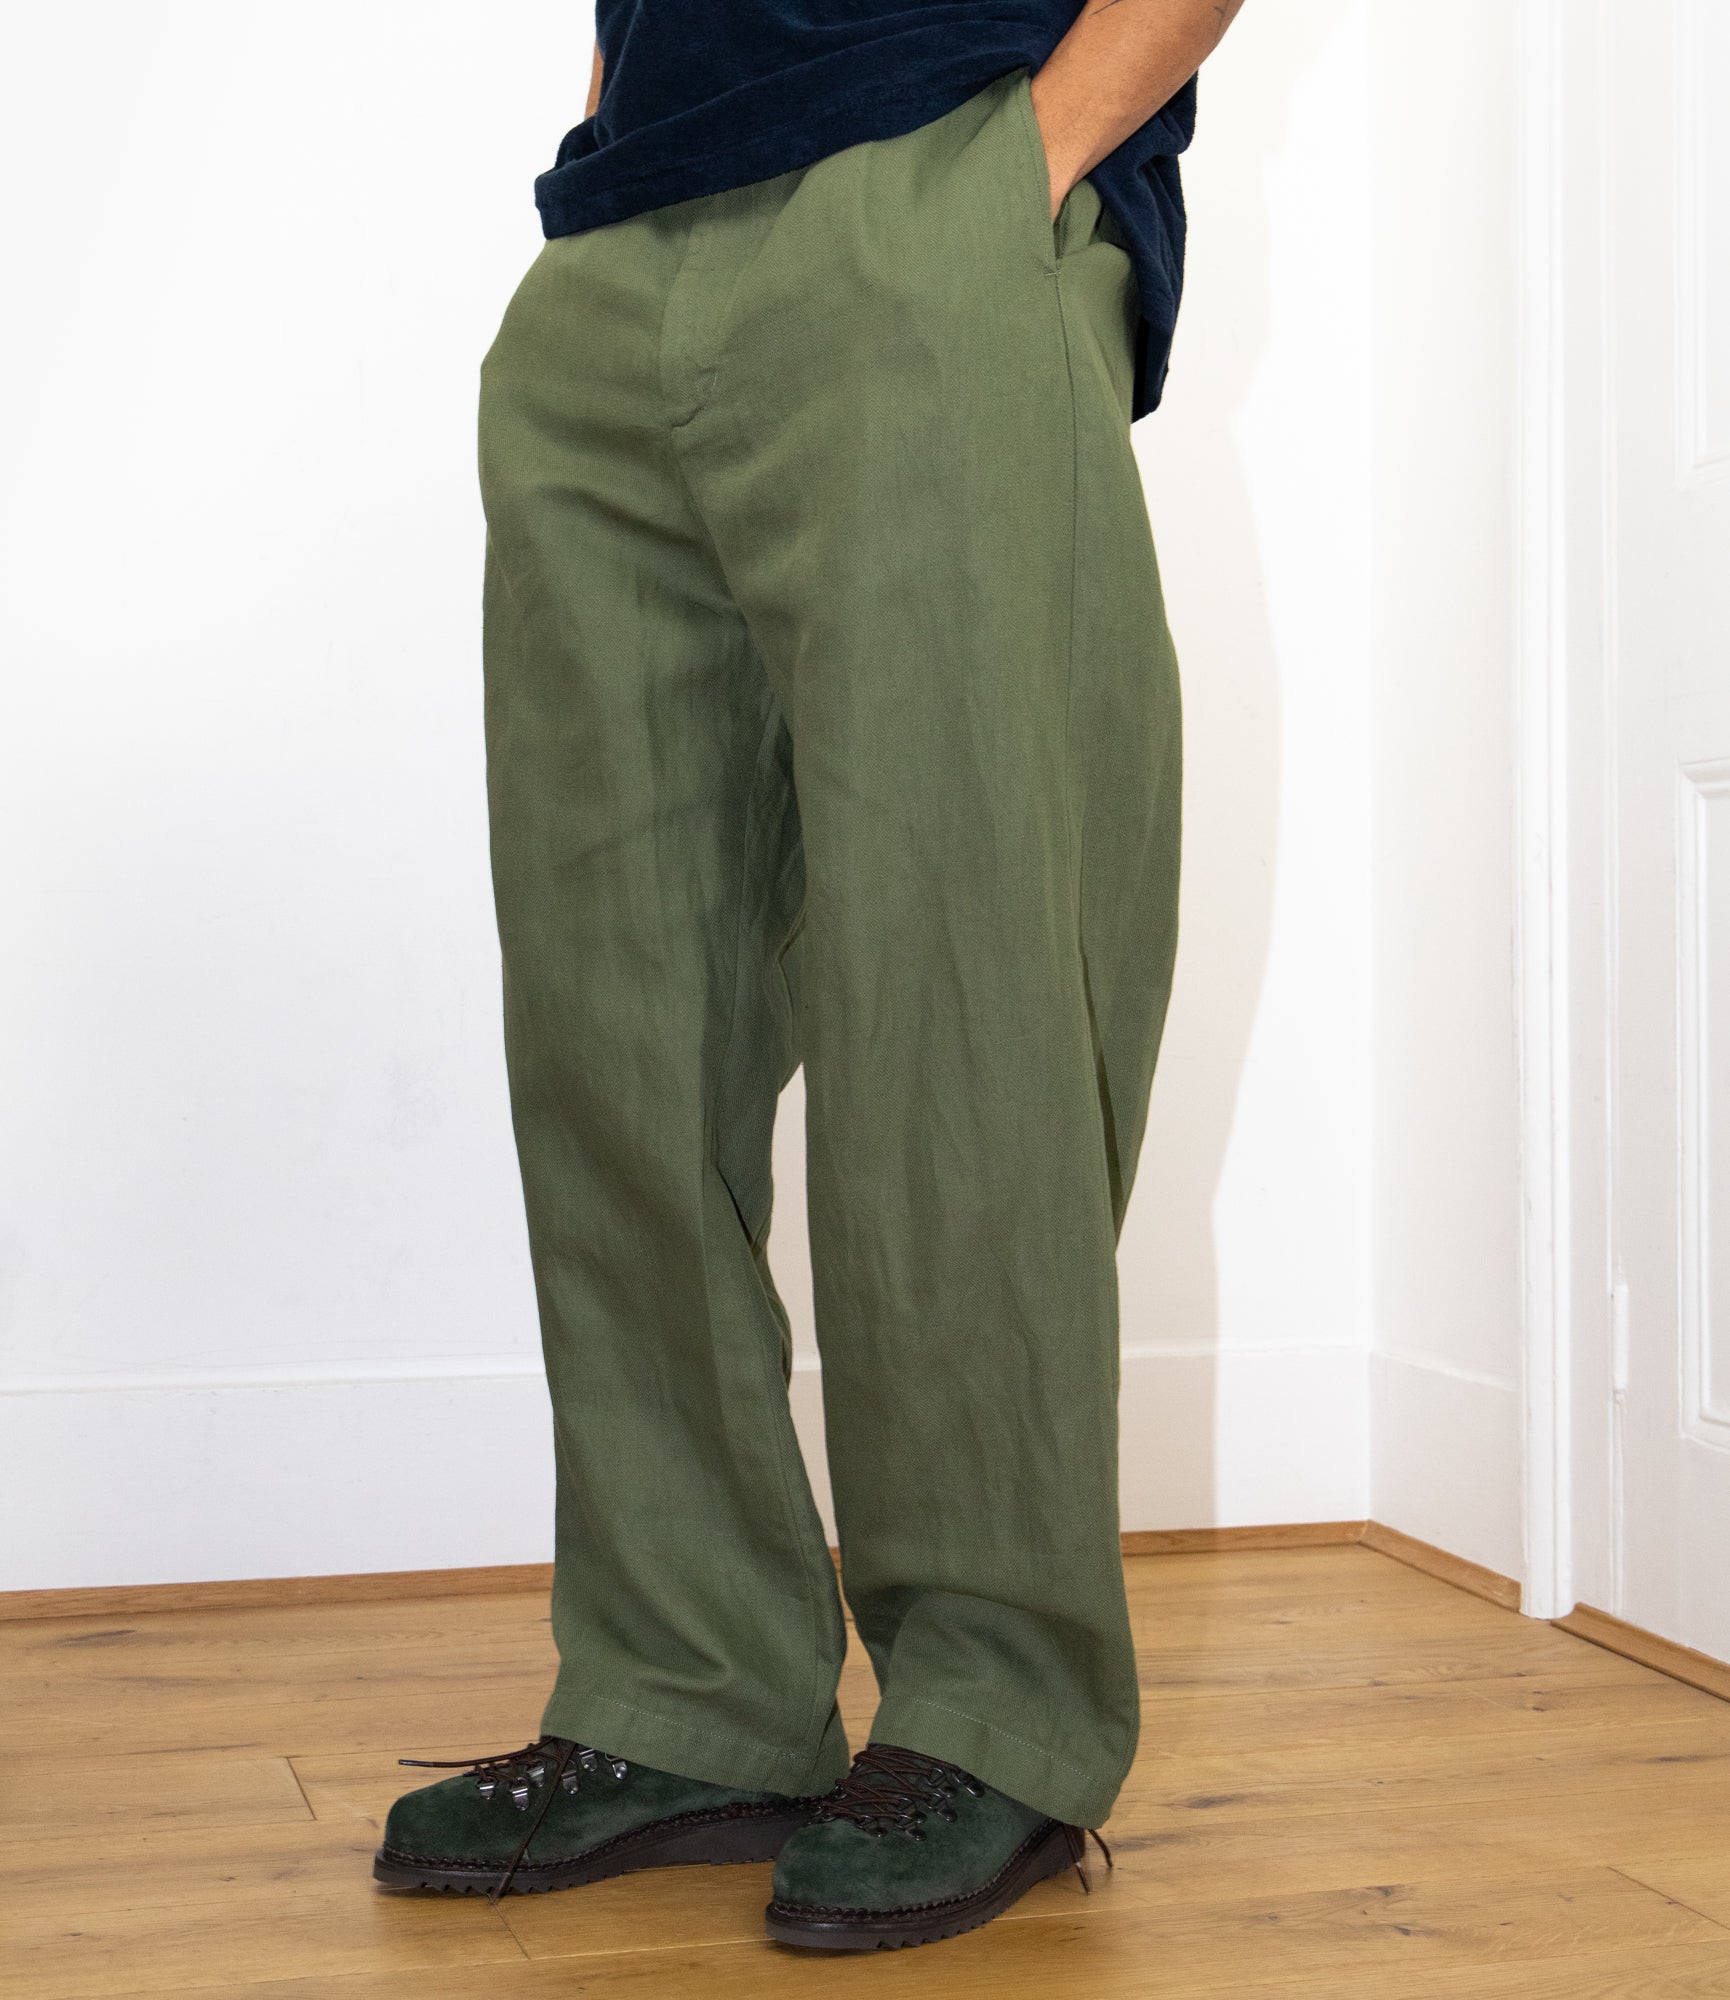 Engineered Garments Officer Pant - Olive Cotton Acetate Satin